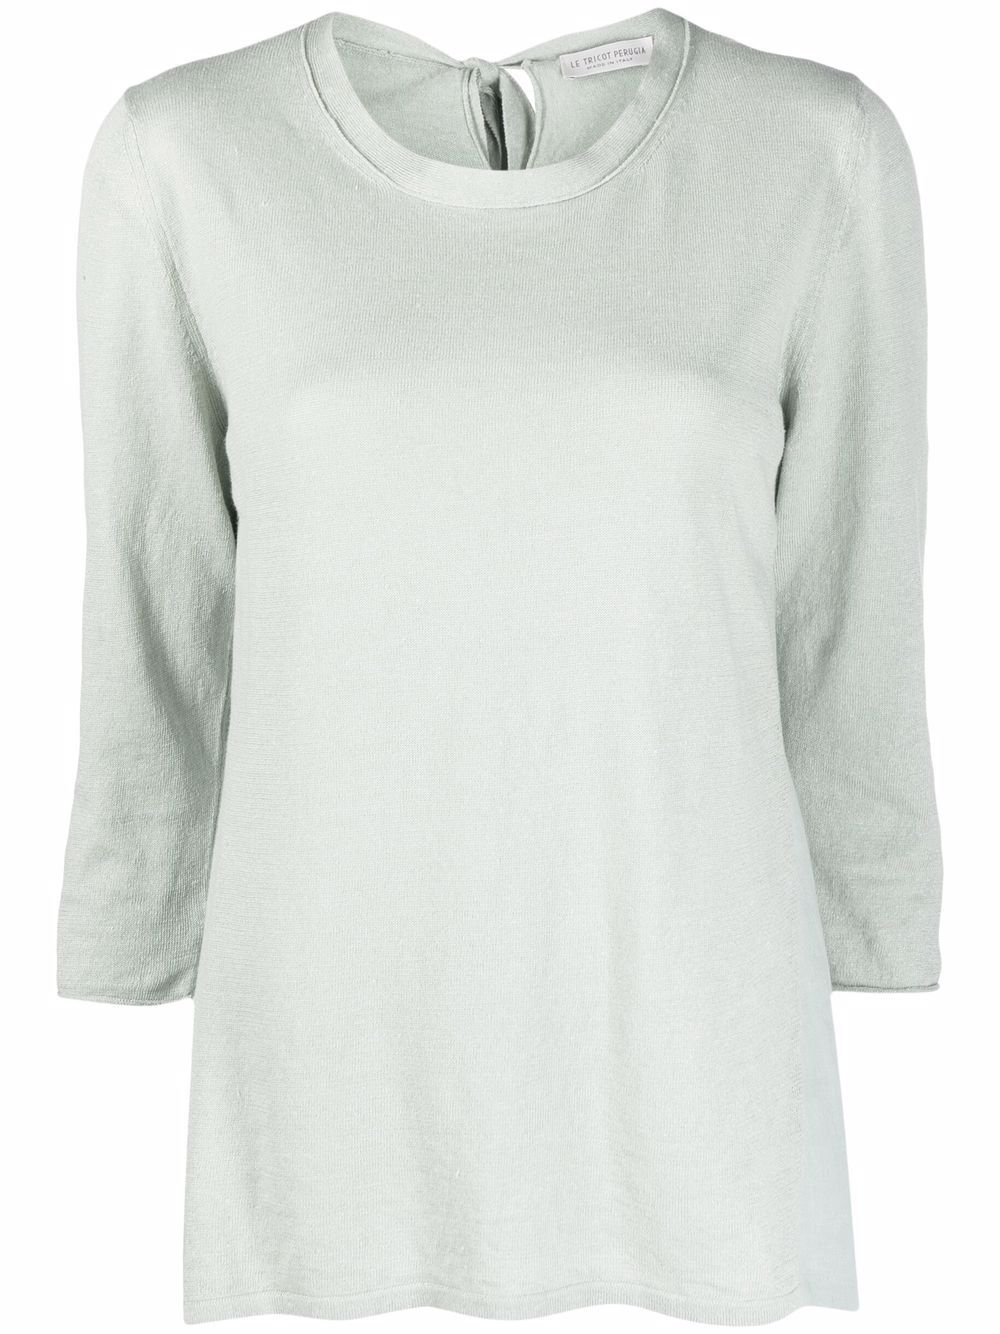 round neck long-sleeved T-shirt